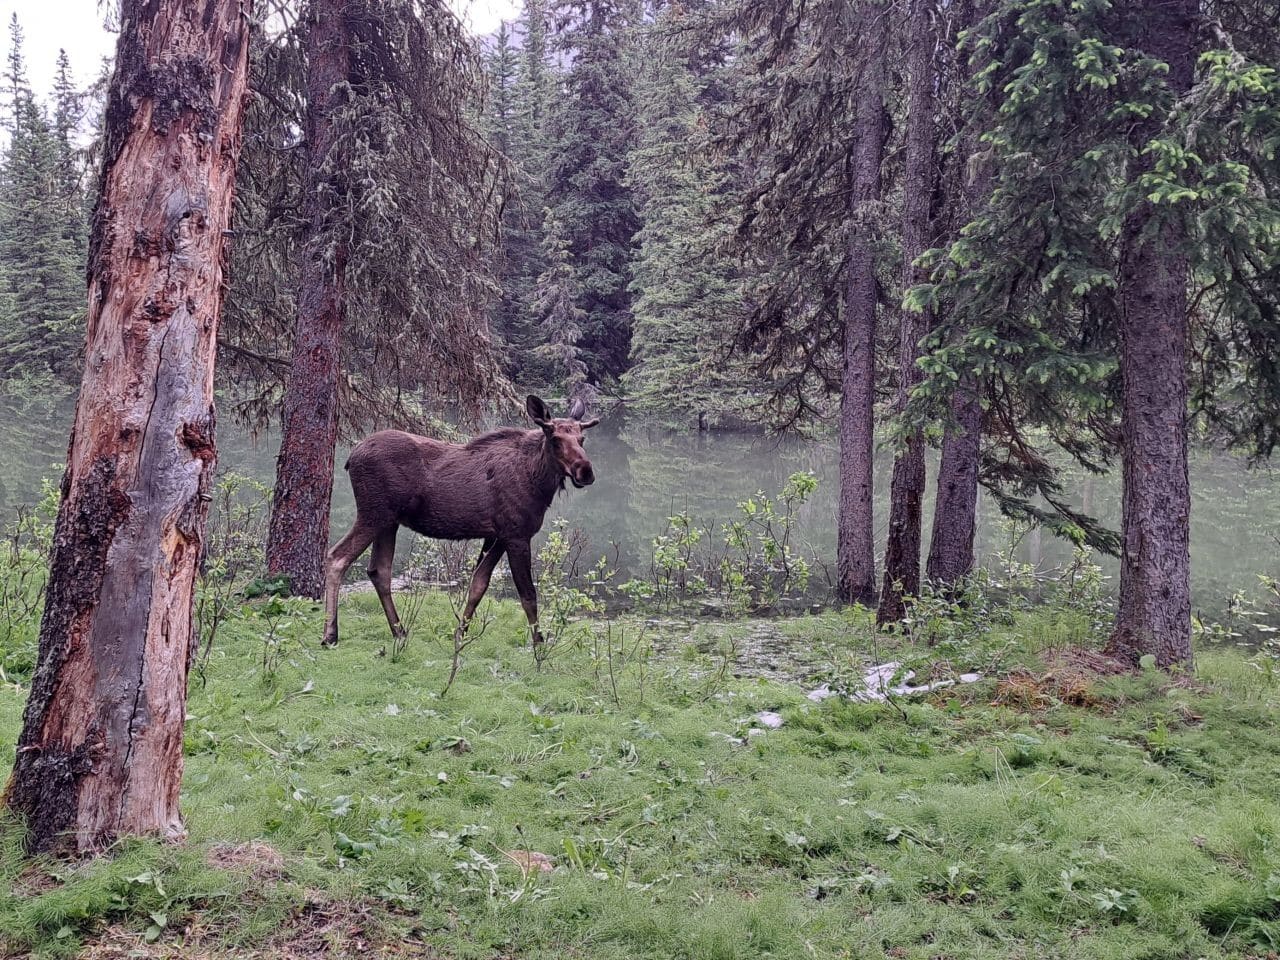 A young moose watches campers eating their breakfasts near the shores of Jacques Lake in Jasper National Park